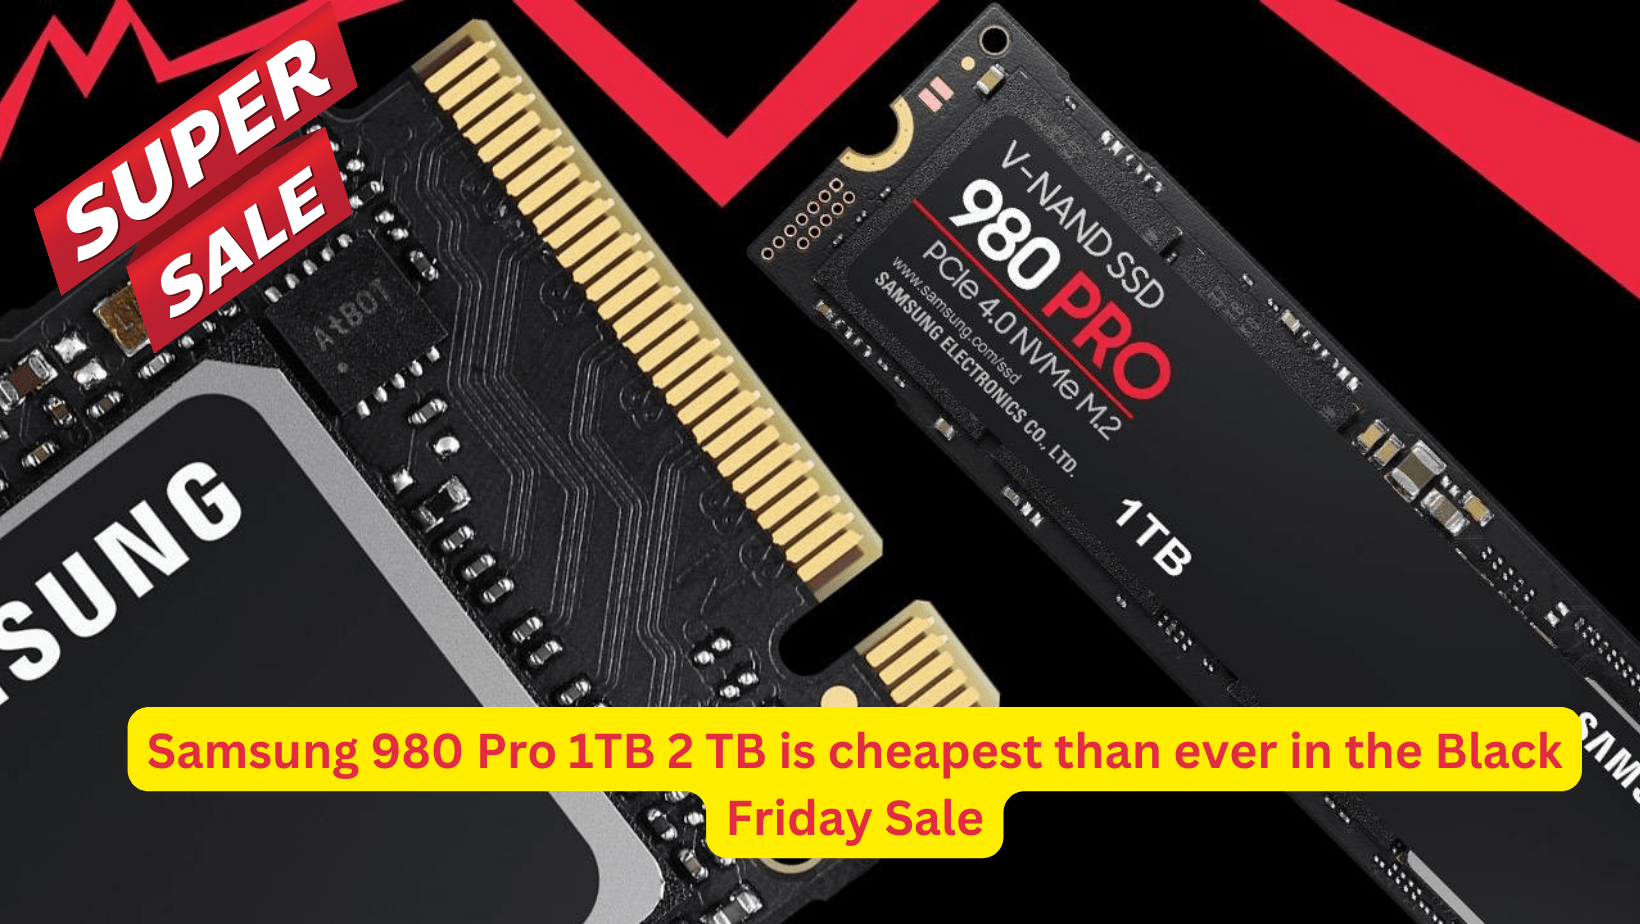 Samsung 980 Pro 1TB 2TB is cheaper than ever in the Black Friday Sale